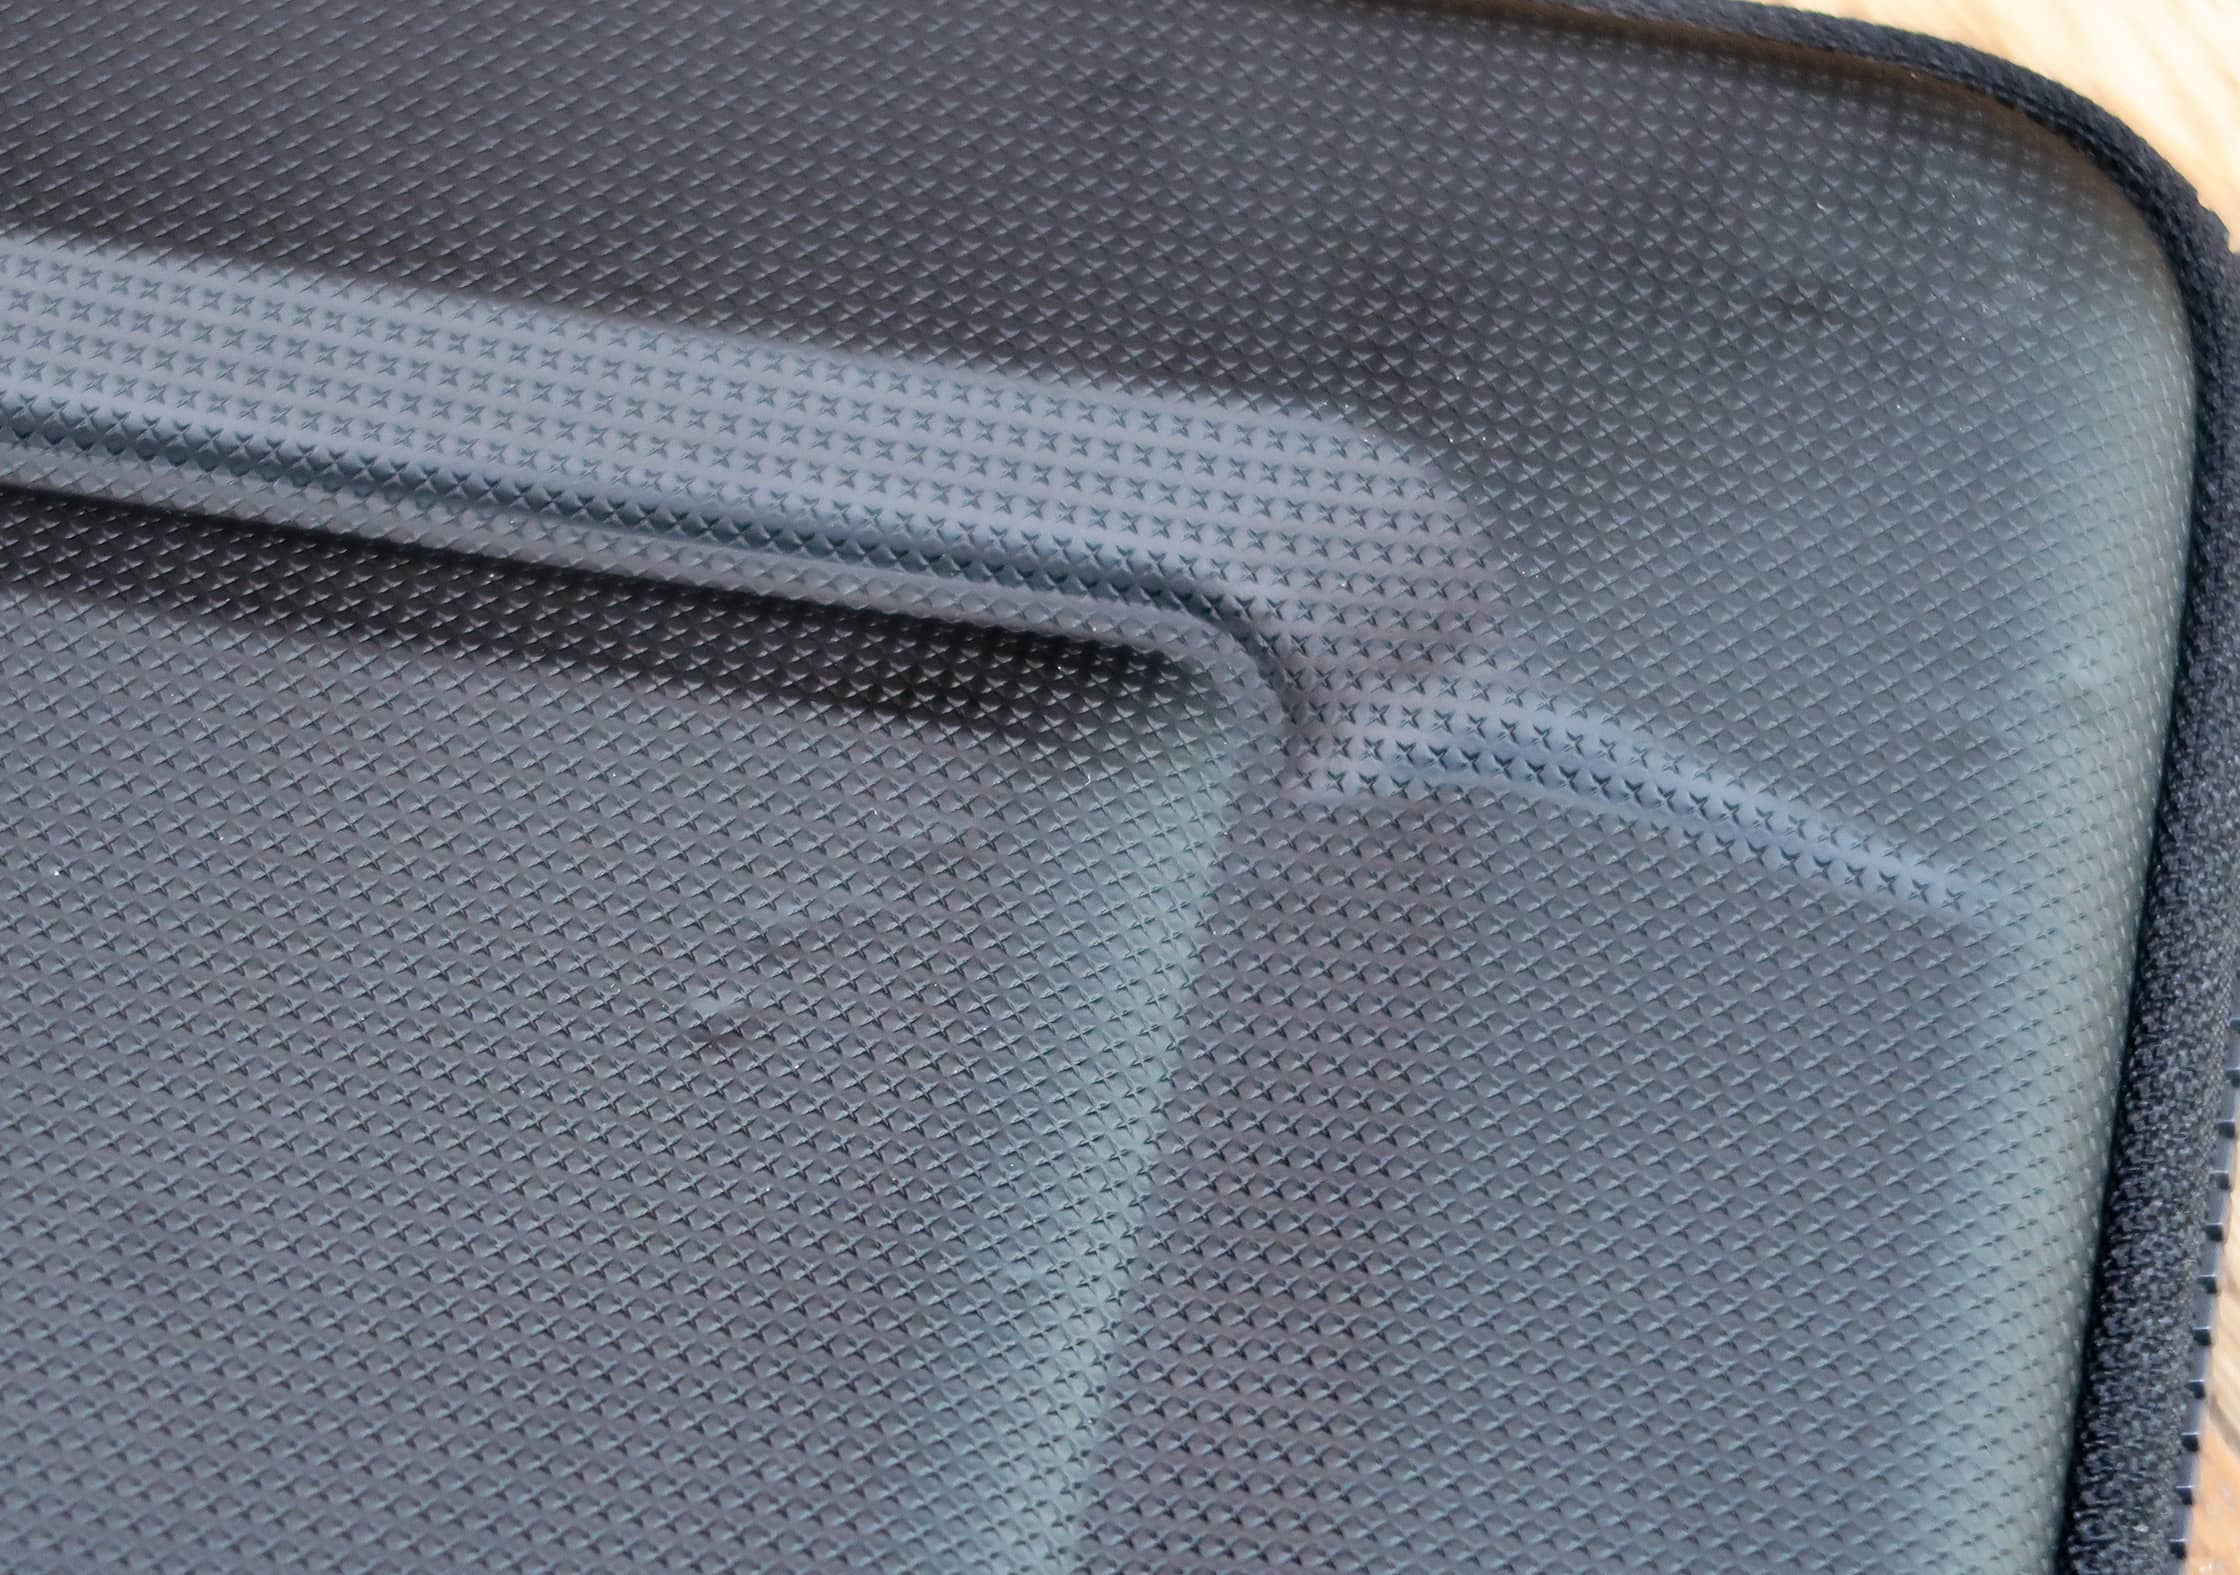 Small Dents In The PU Material Of The Thule Gauntlet 3.0 Laptop Sleeve